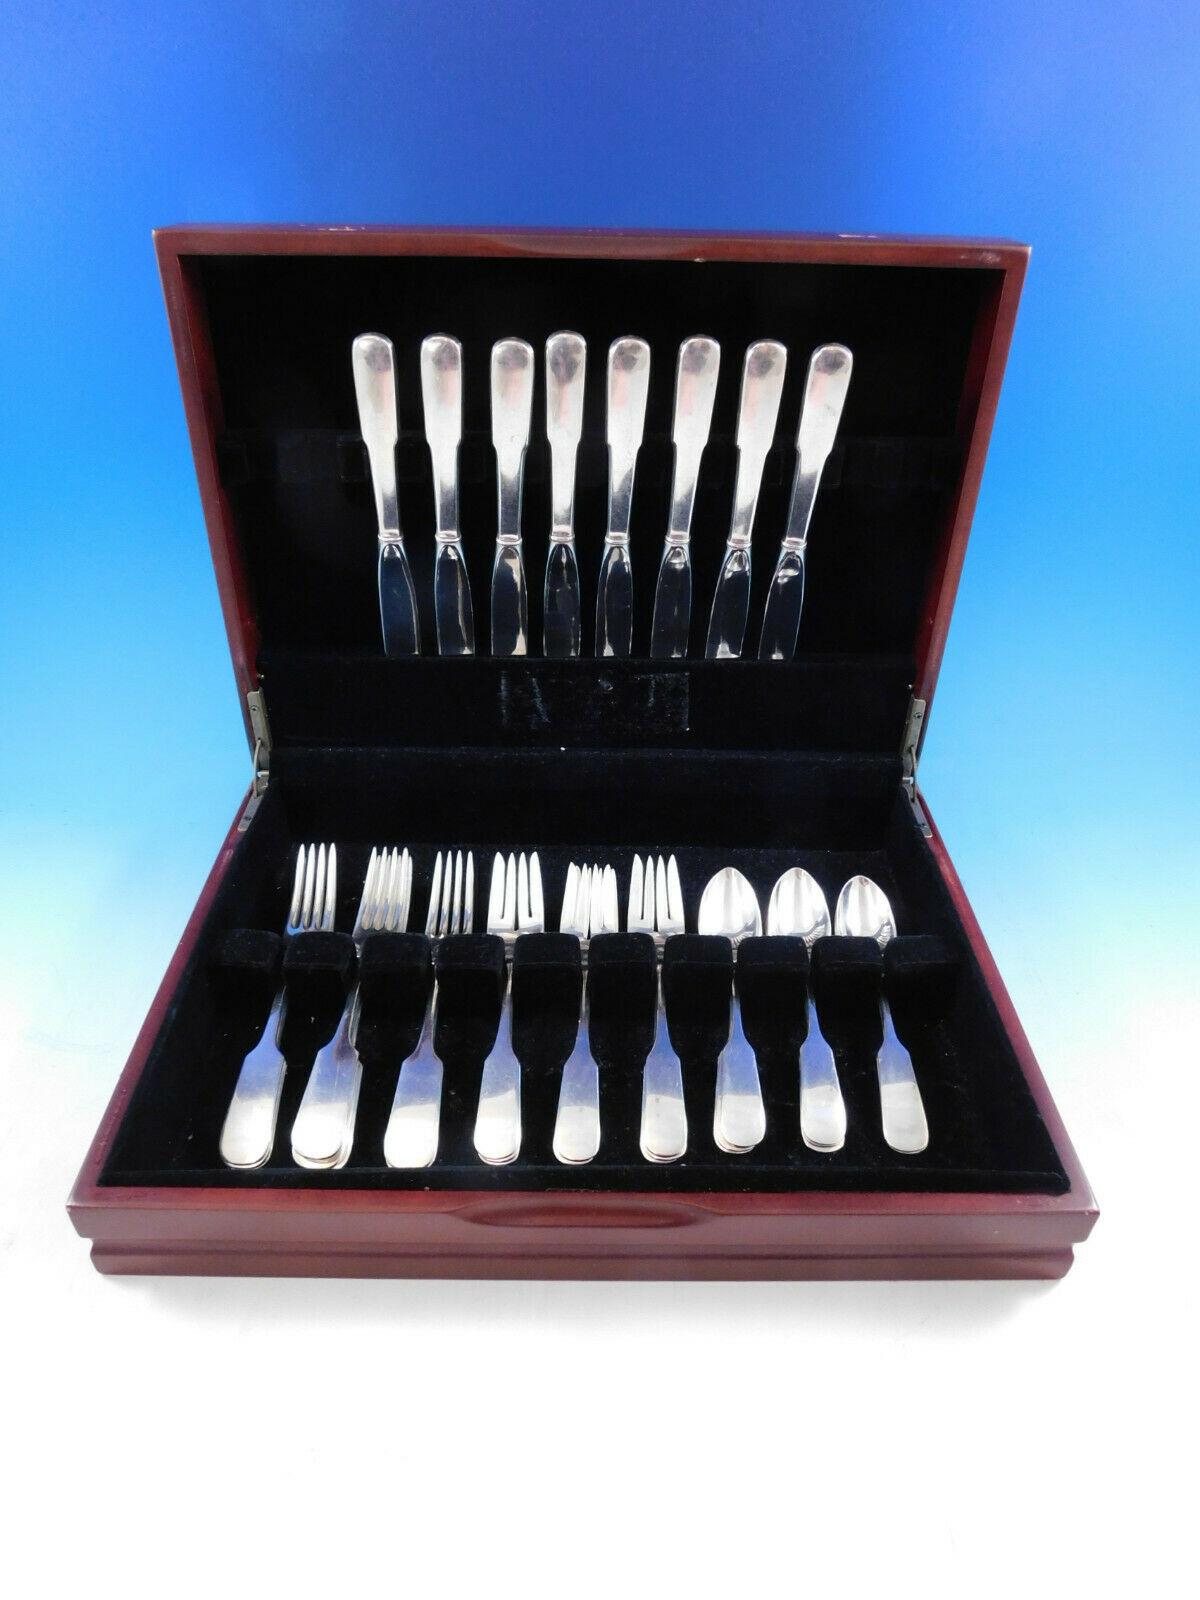 Old English Tipt by Gorham sterling silver Flatware set - 32 Pieces. This set includes:

8 Knives, 8 3/4